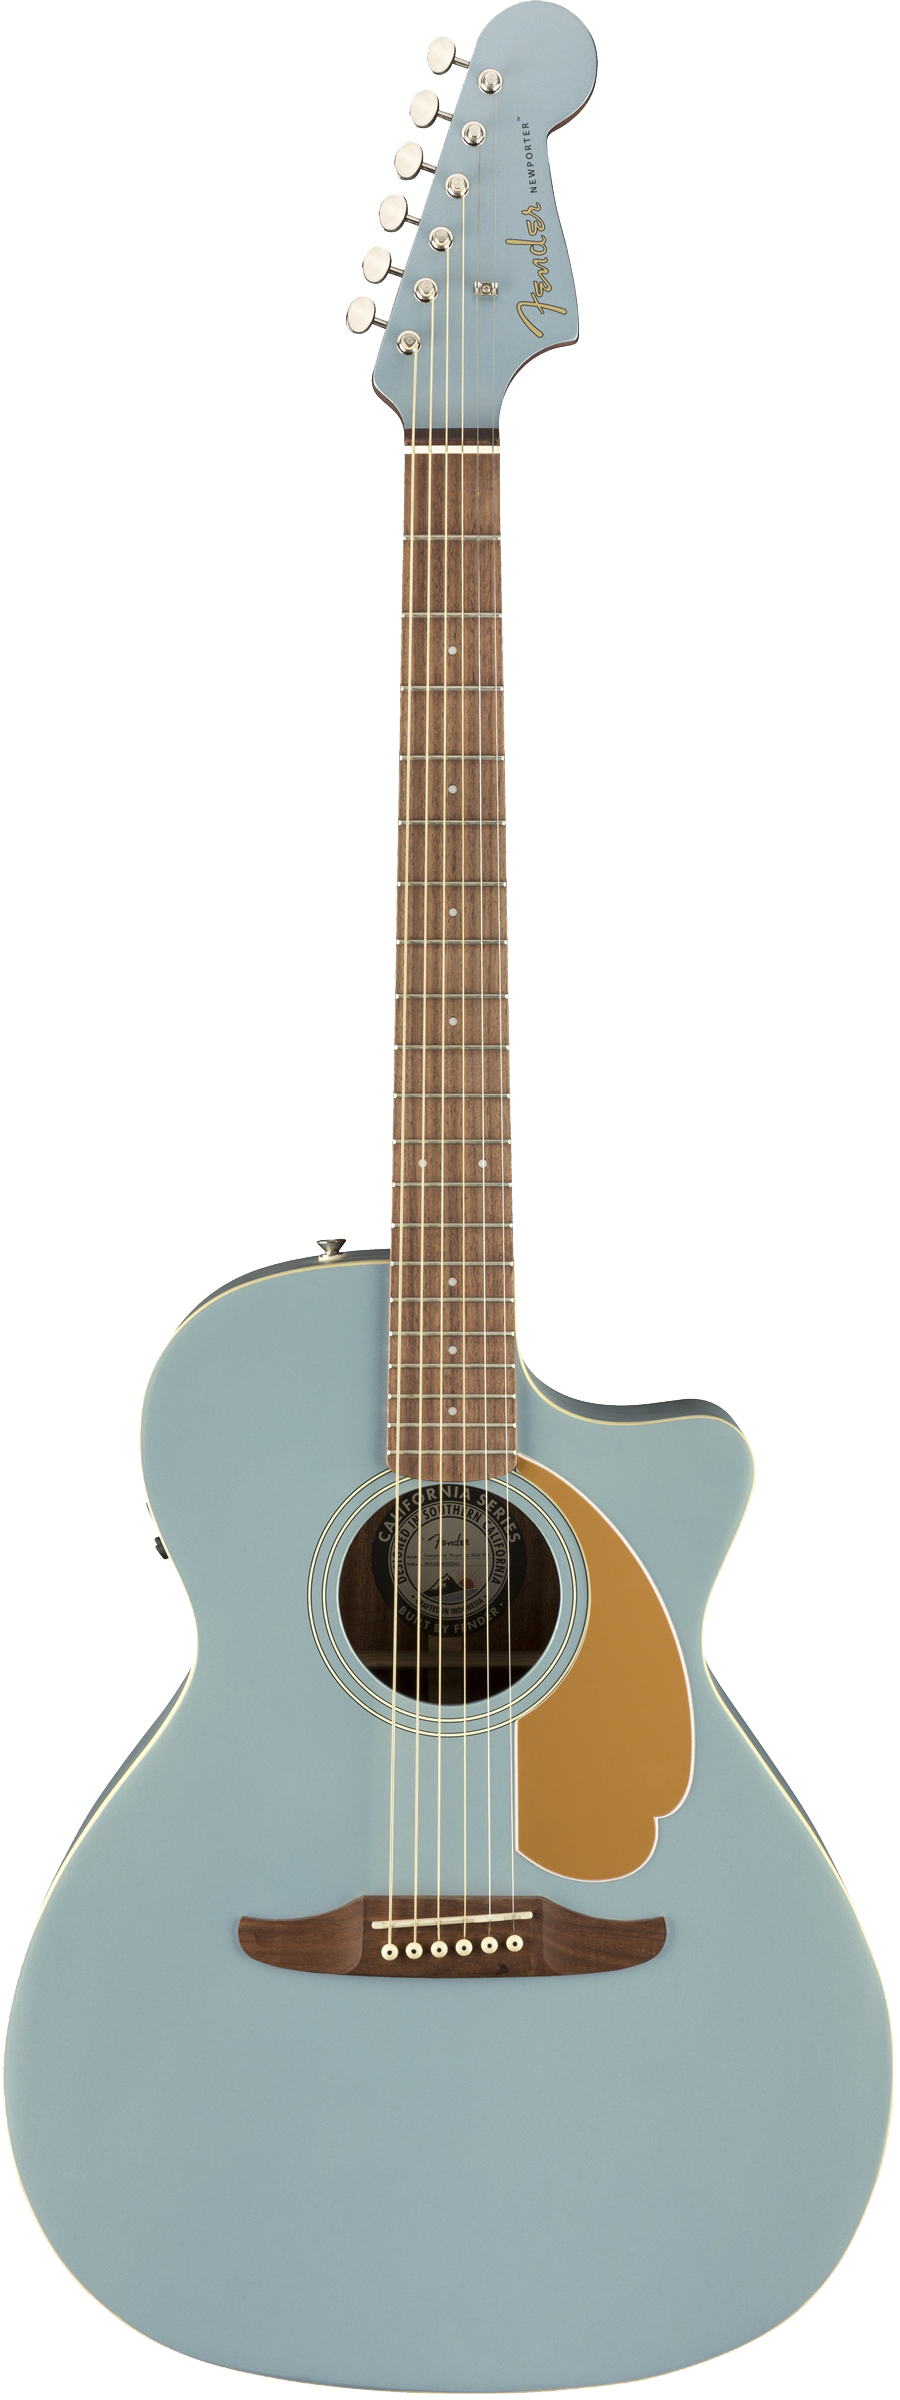 Fender Newporter Player Acoustic / Electric Guitar - Ice Blue